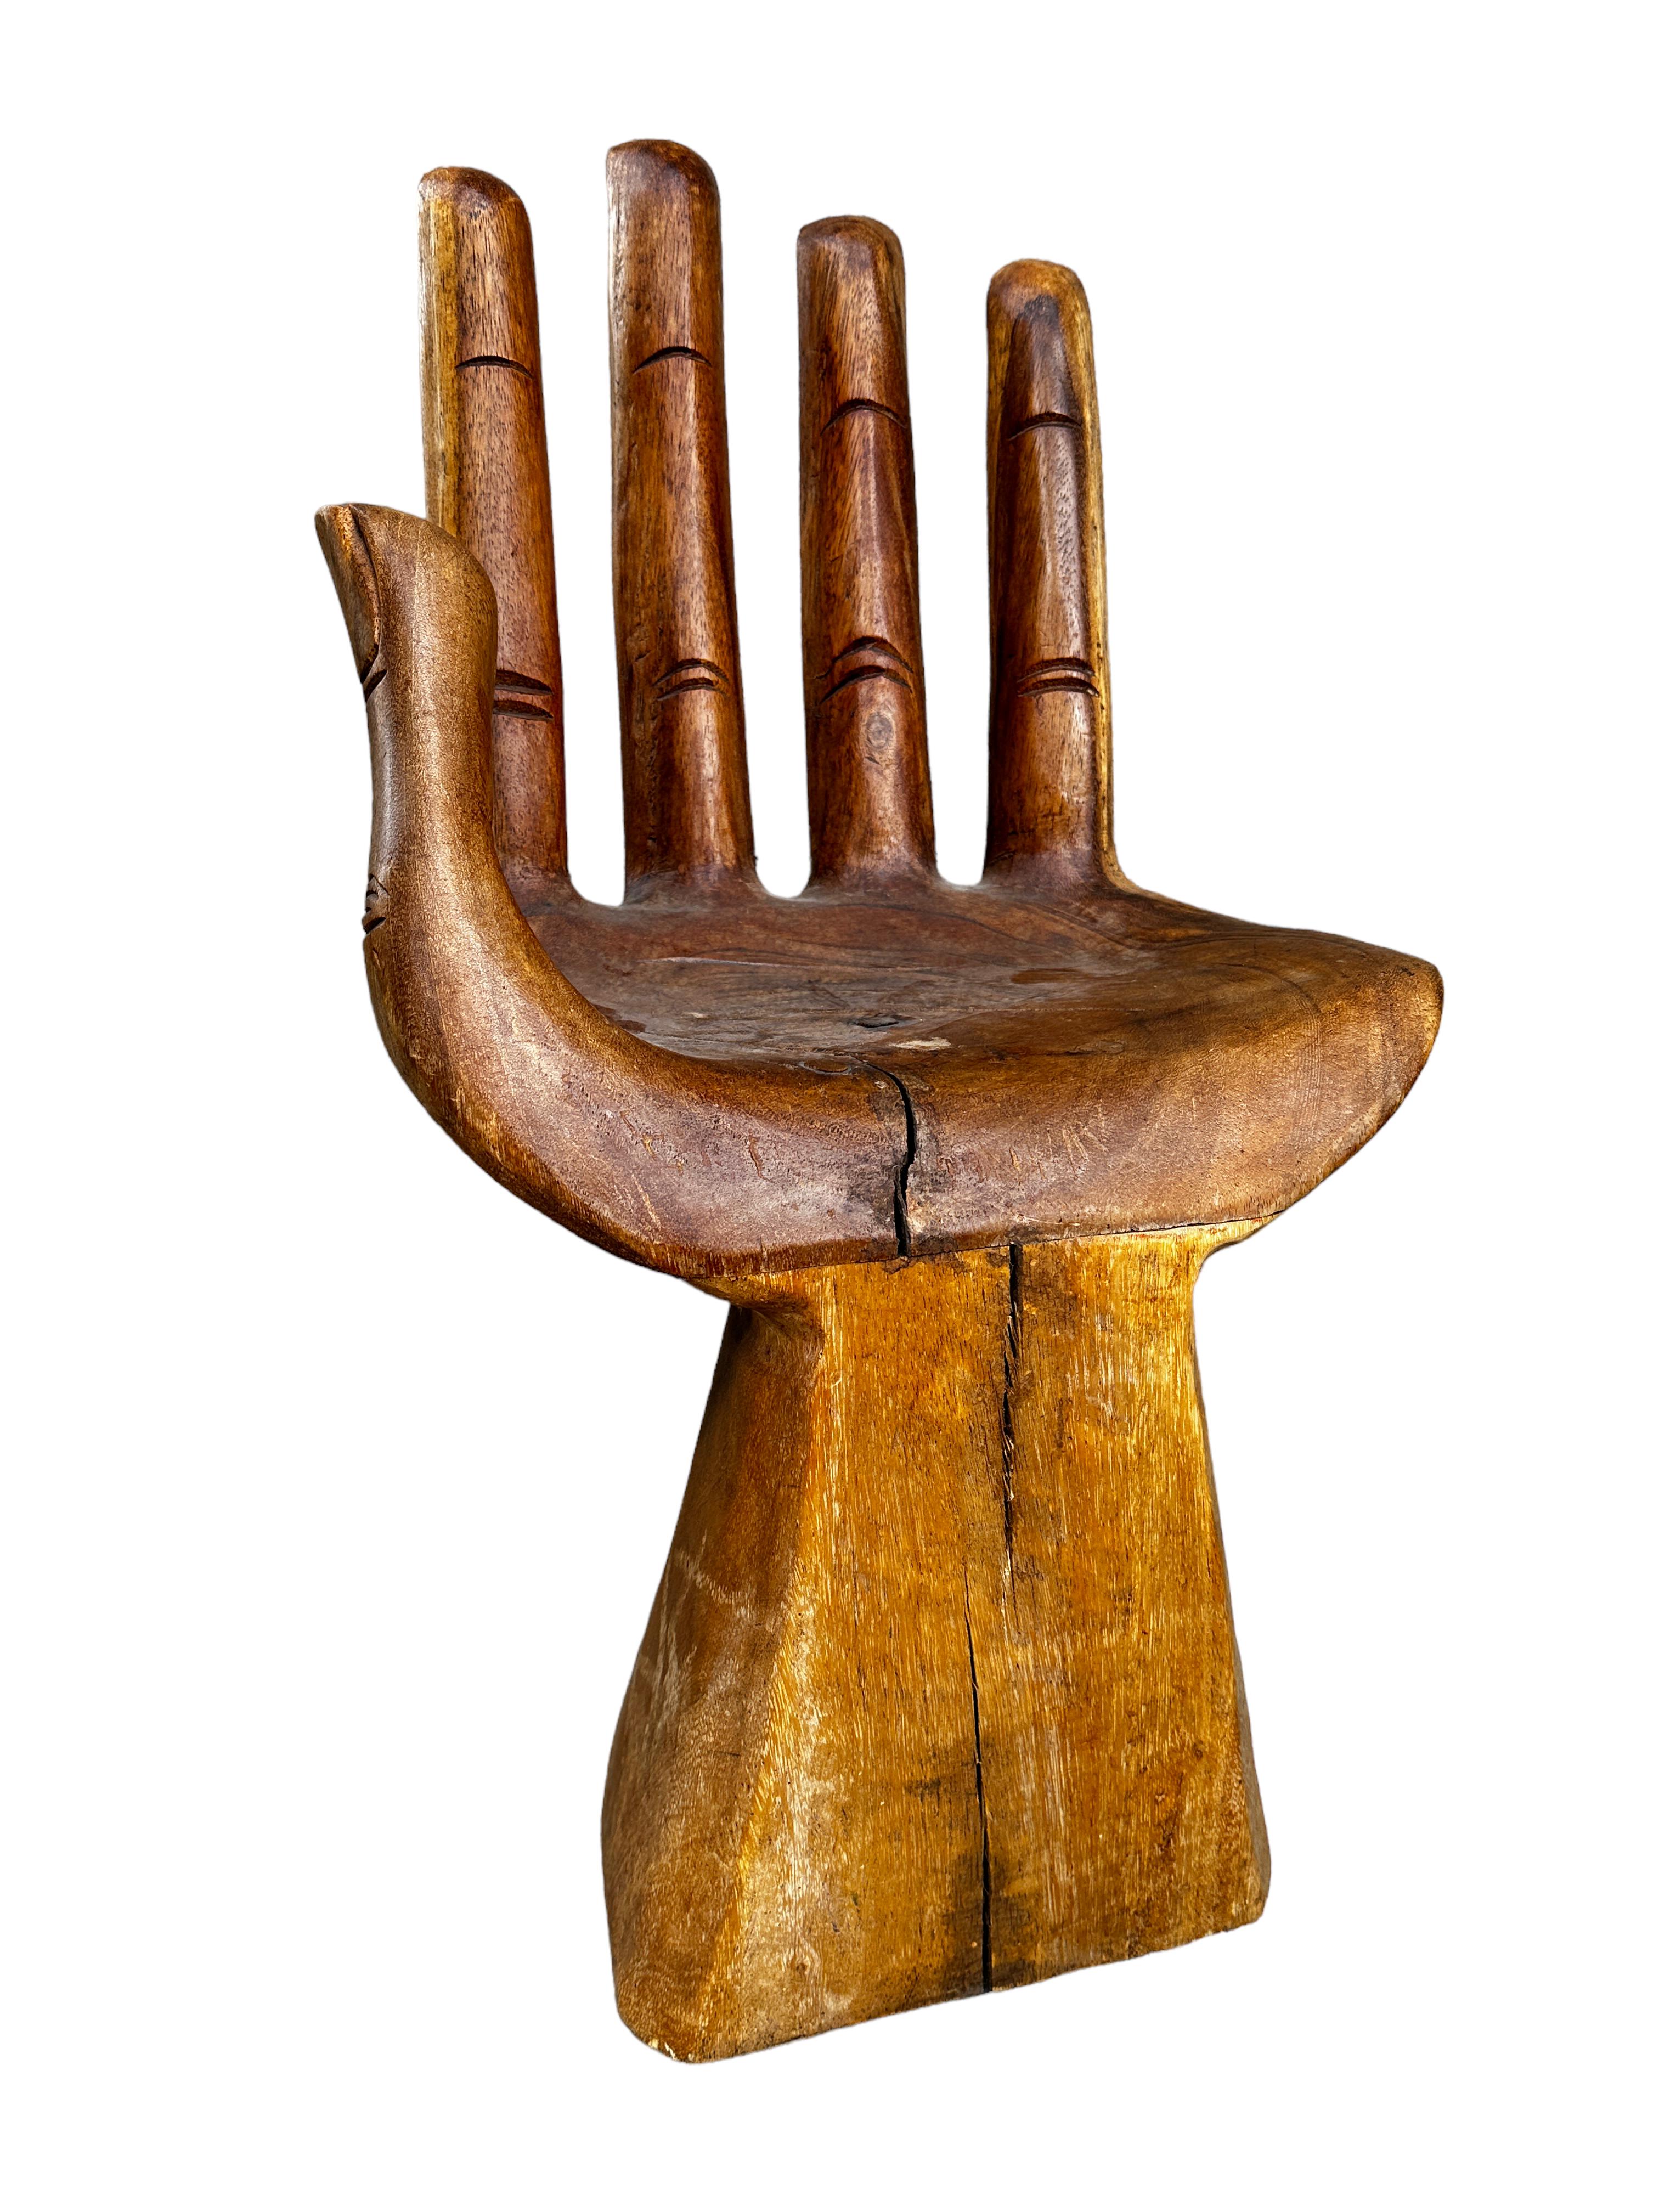 An amazing Mid-Century Modern finely detailed studio carved hand chair, circa 1970s, in the Style of Pedro Friedeberg, that brings both a meditative element and a unique functional sculpture into your home with the artisan crafted wood Carved Hand